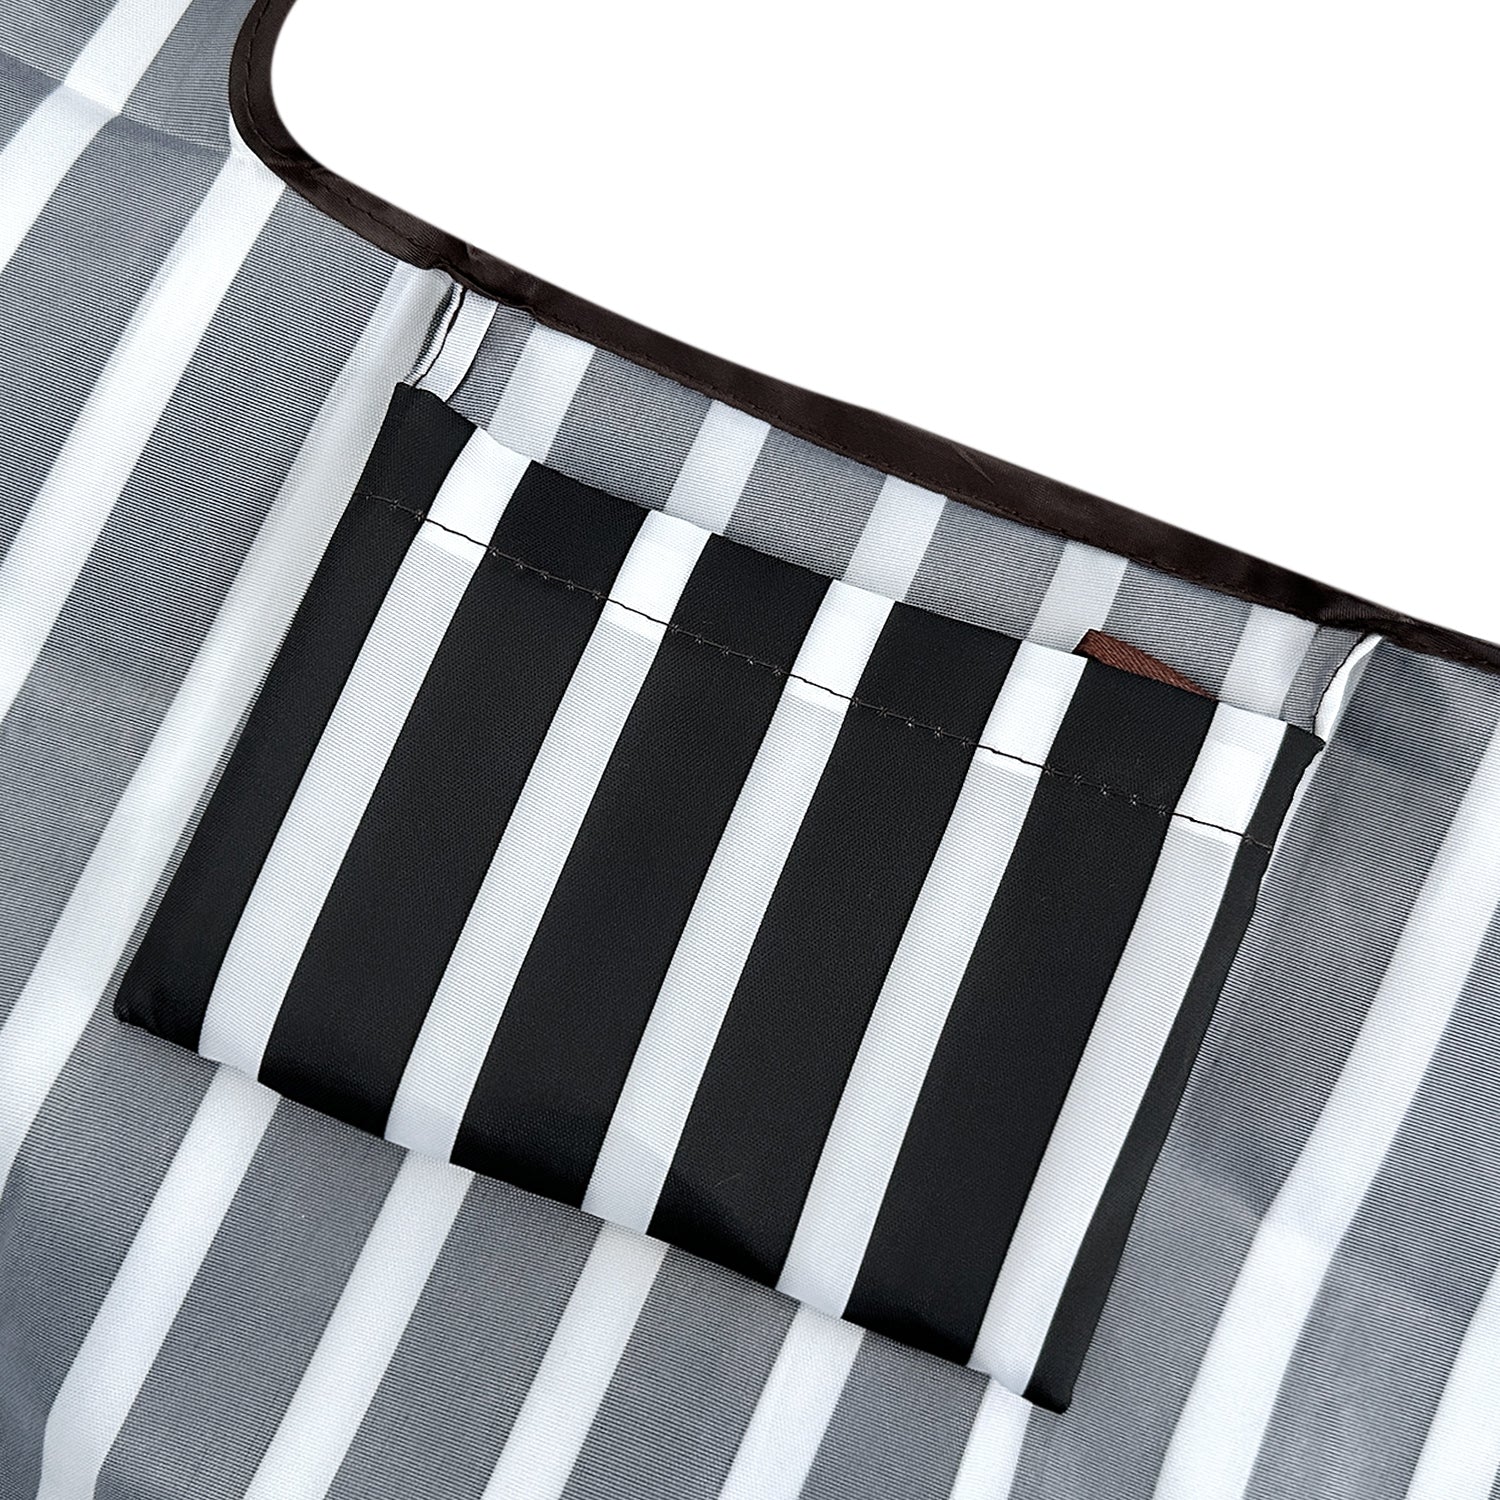 Wrapables Large & Small Foldable Tote Nylon Reusable Grocery Bags, Set of 2, Black Stripes